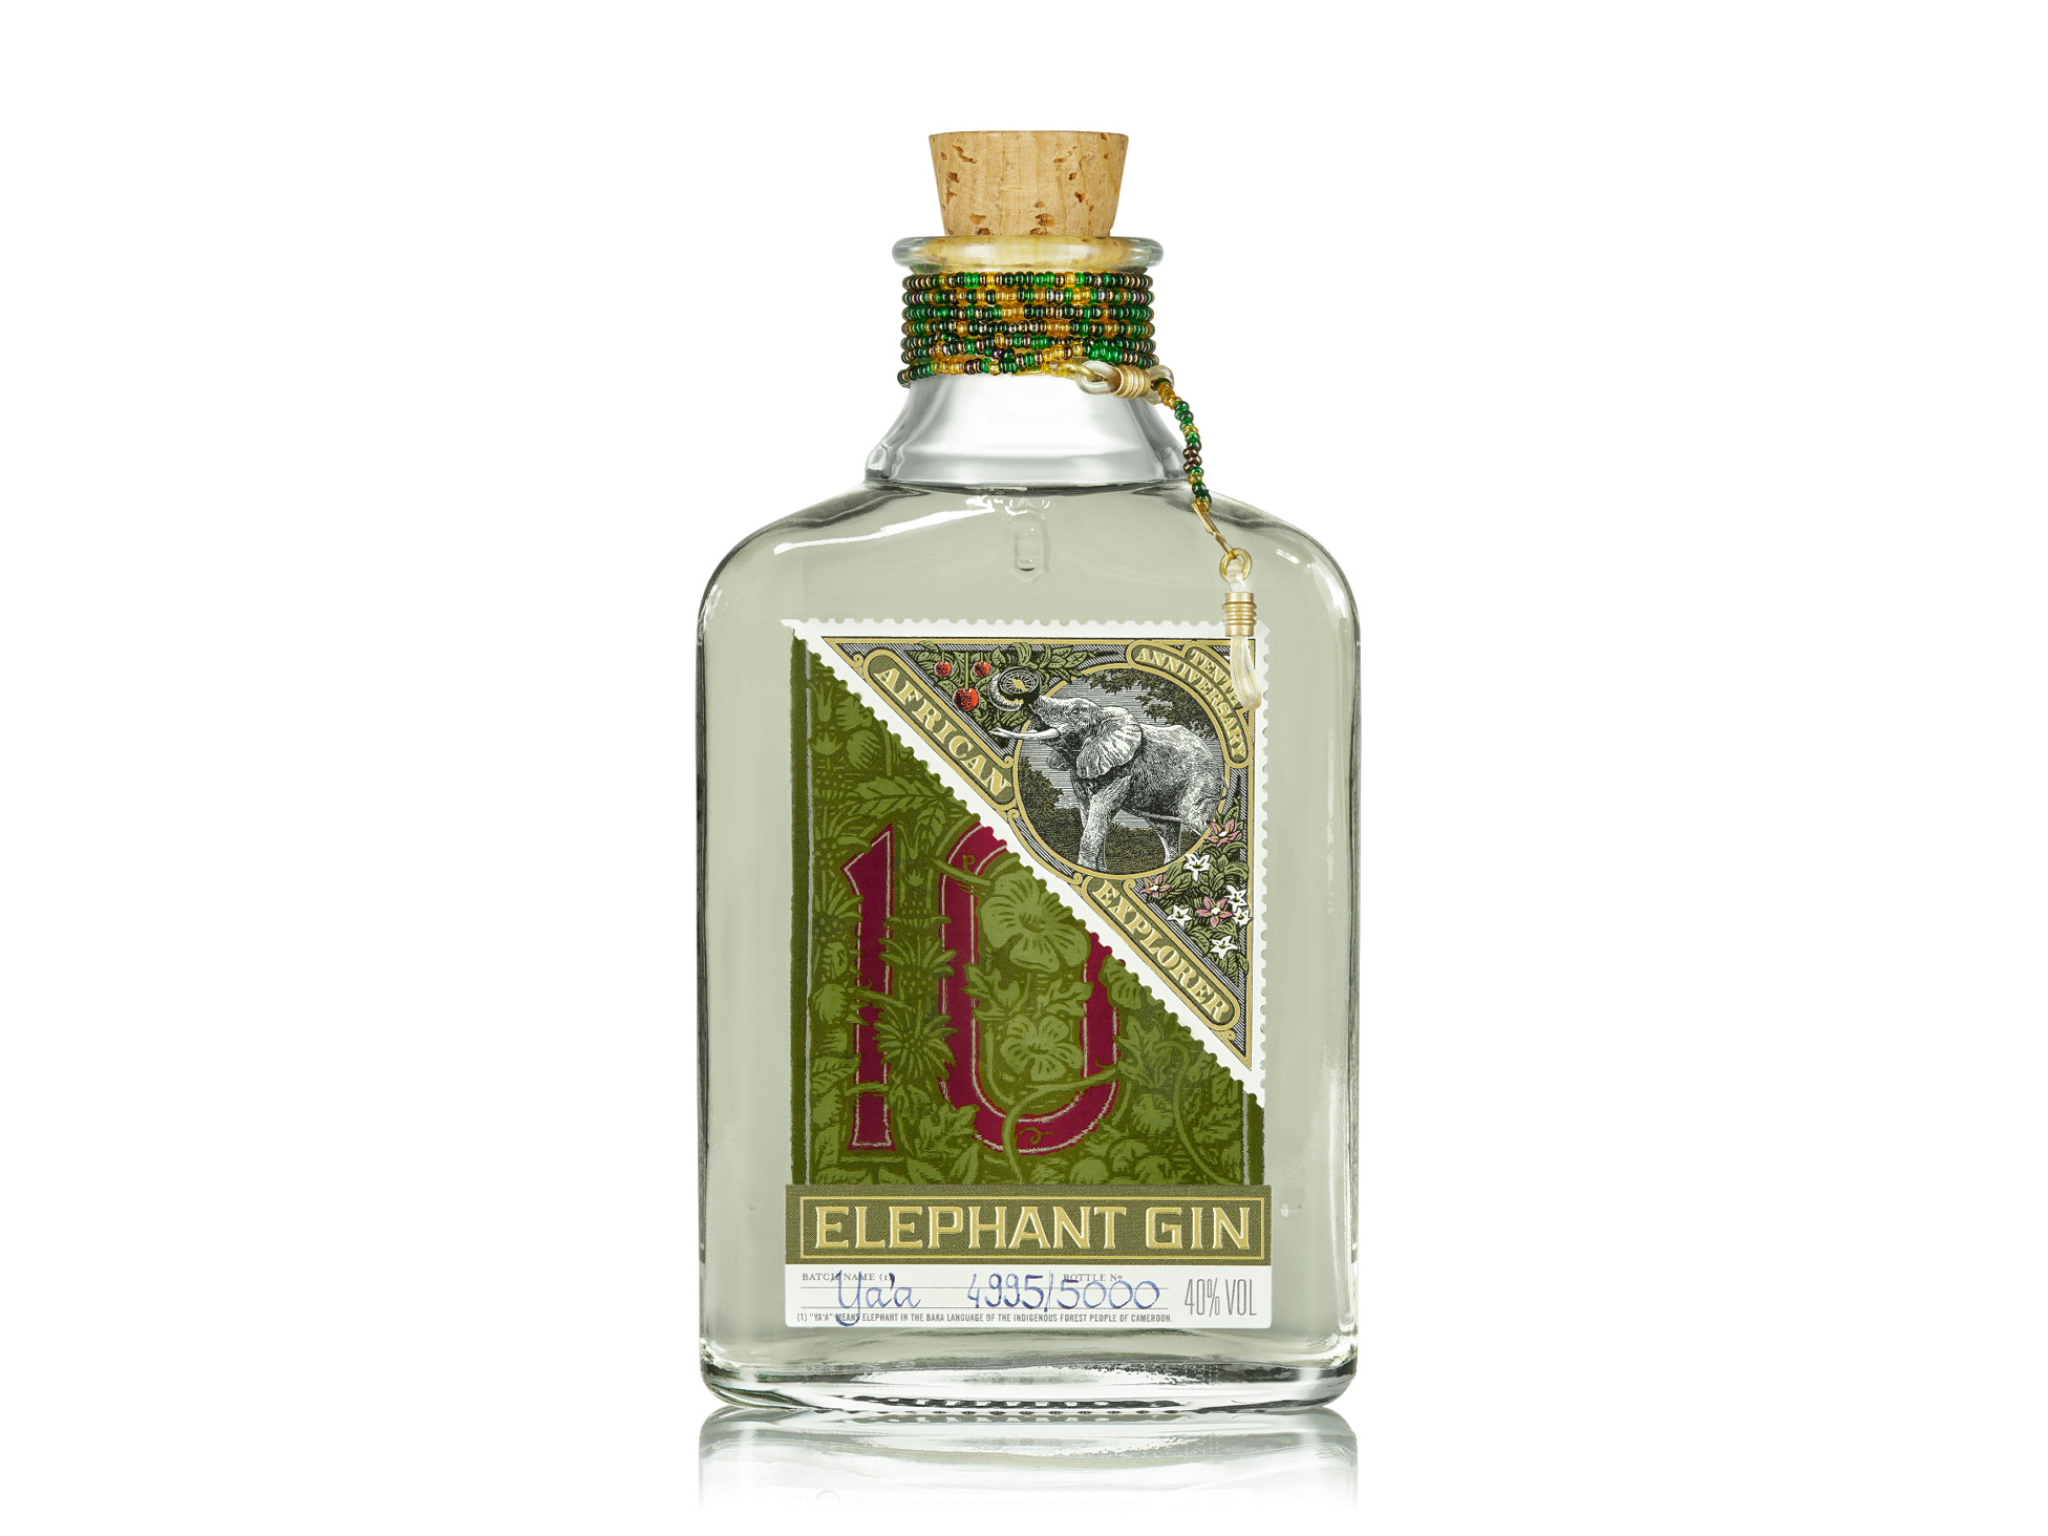 Elephant-Gin-African-Explorer-limited-edition-gin-indybest